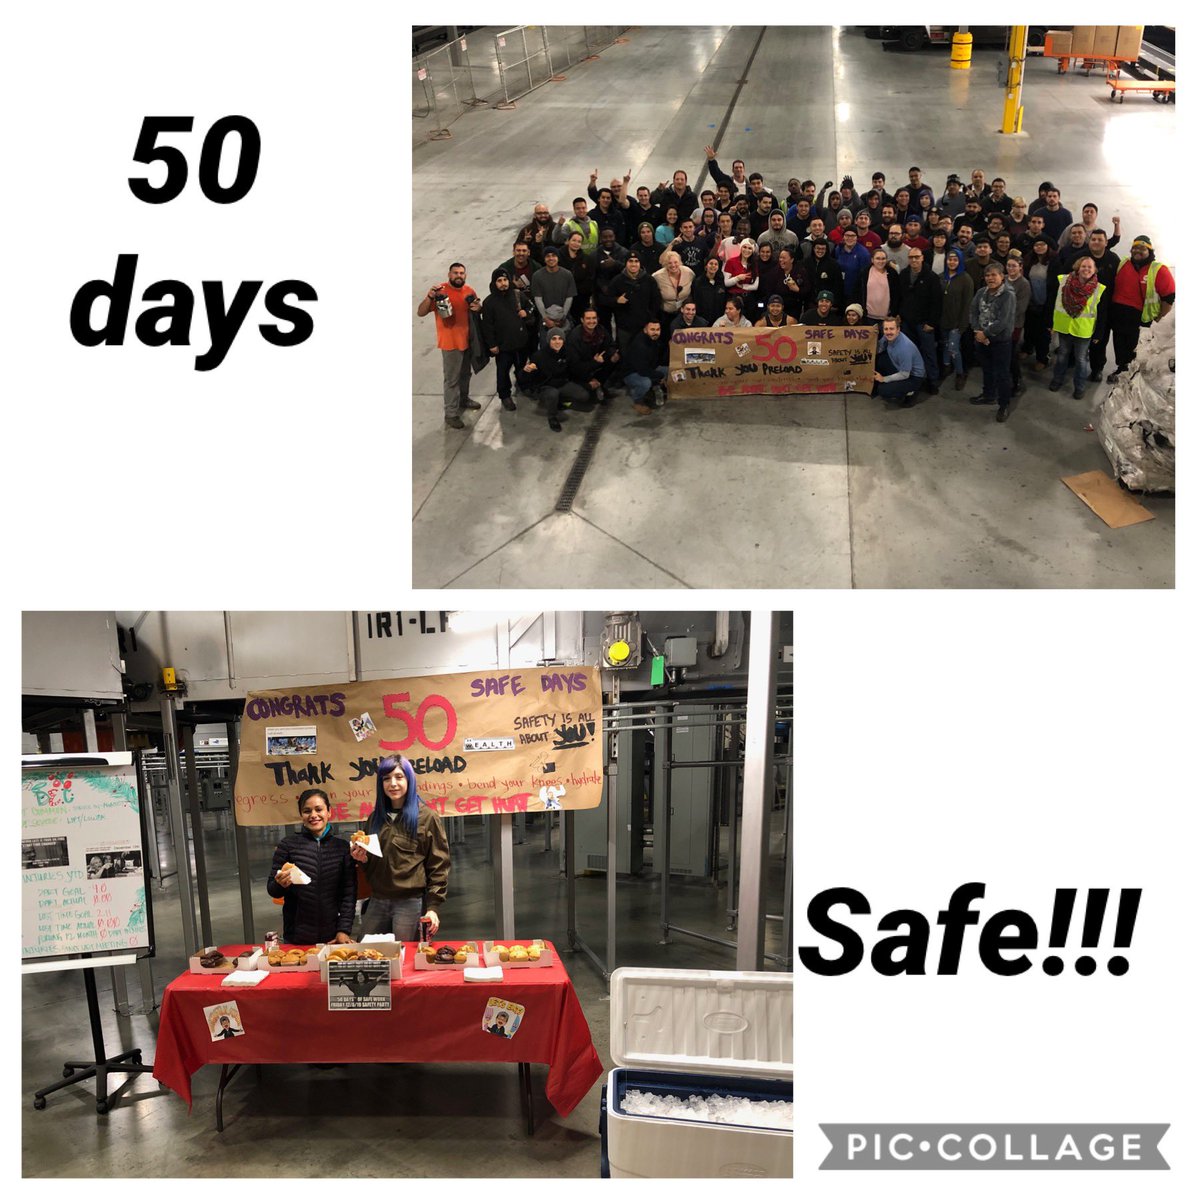 What!? We can’t hear you over all the safe days going on in La Mirada preload! #worldclass #staycalmhavefun @jrindafernshaw @RayRoche7 @ChinaJeter